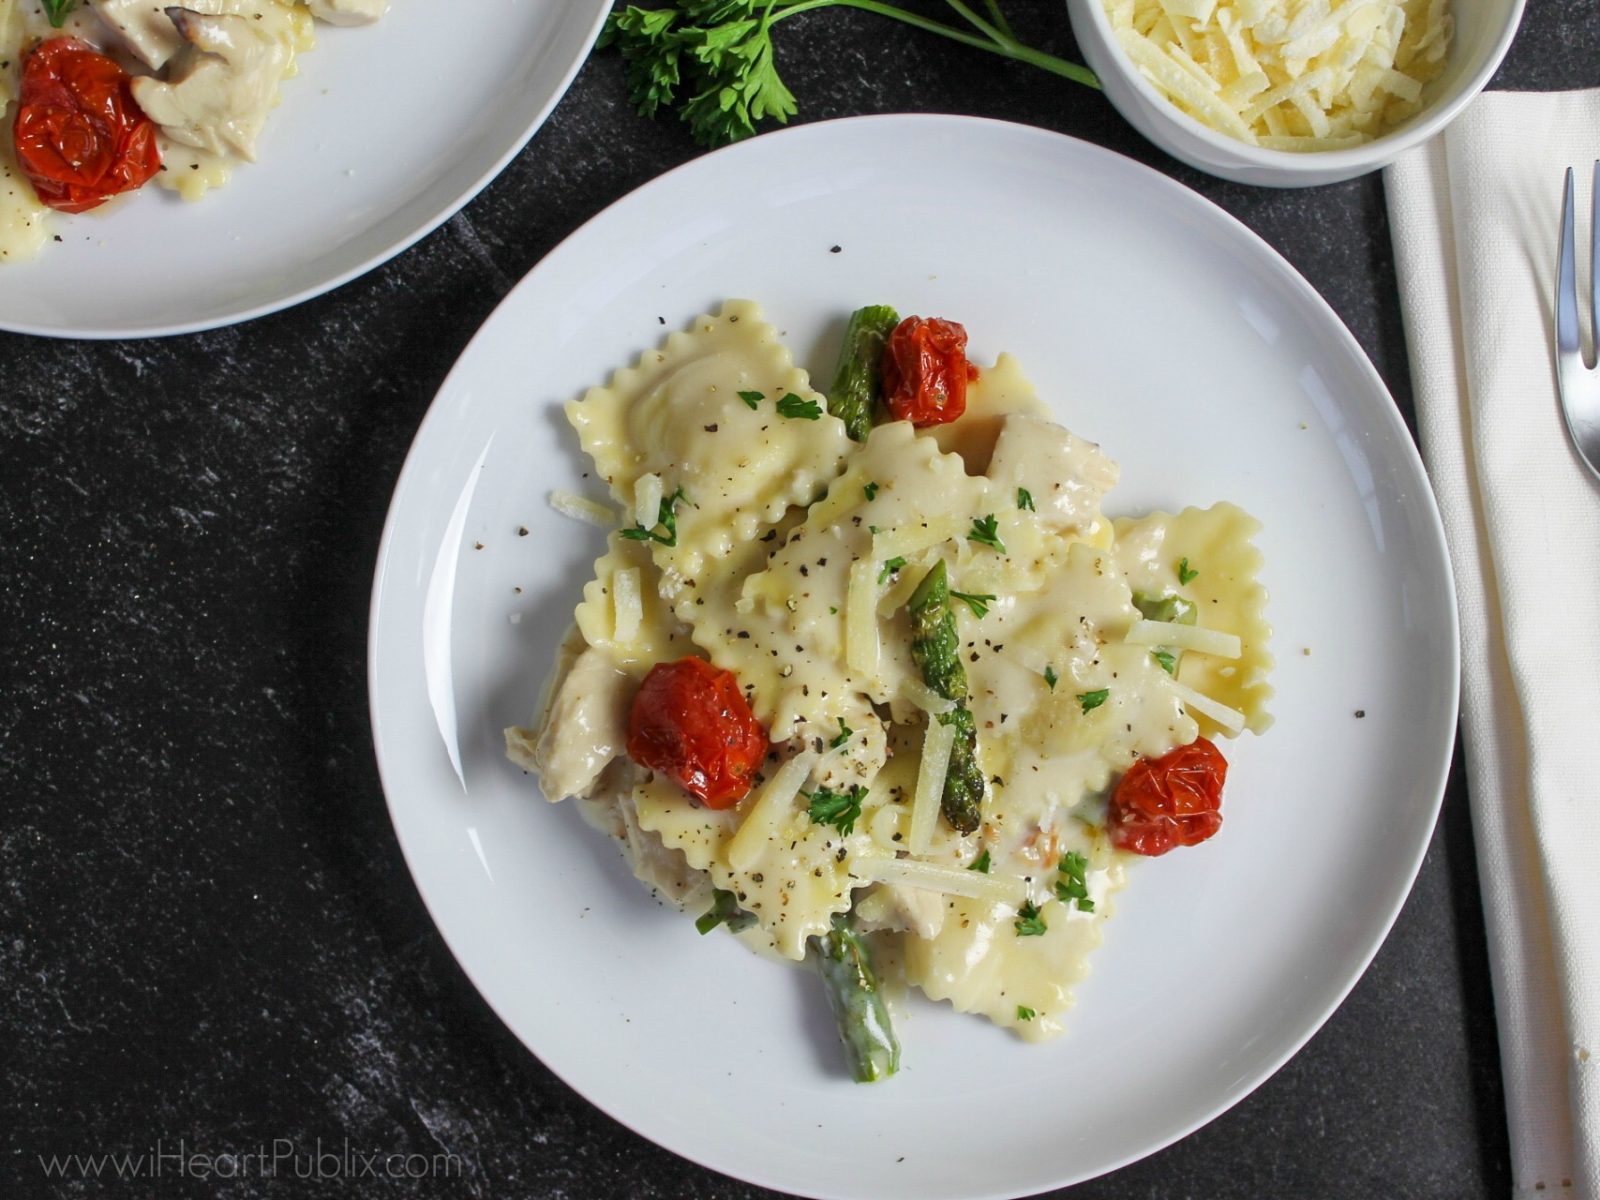 Chicken Alfredo Ravioli With Roasted Asparagus & Tomatoes – Super Meal To Go With The Deals At Publix